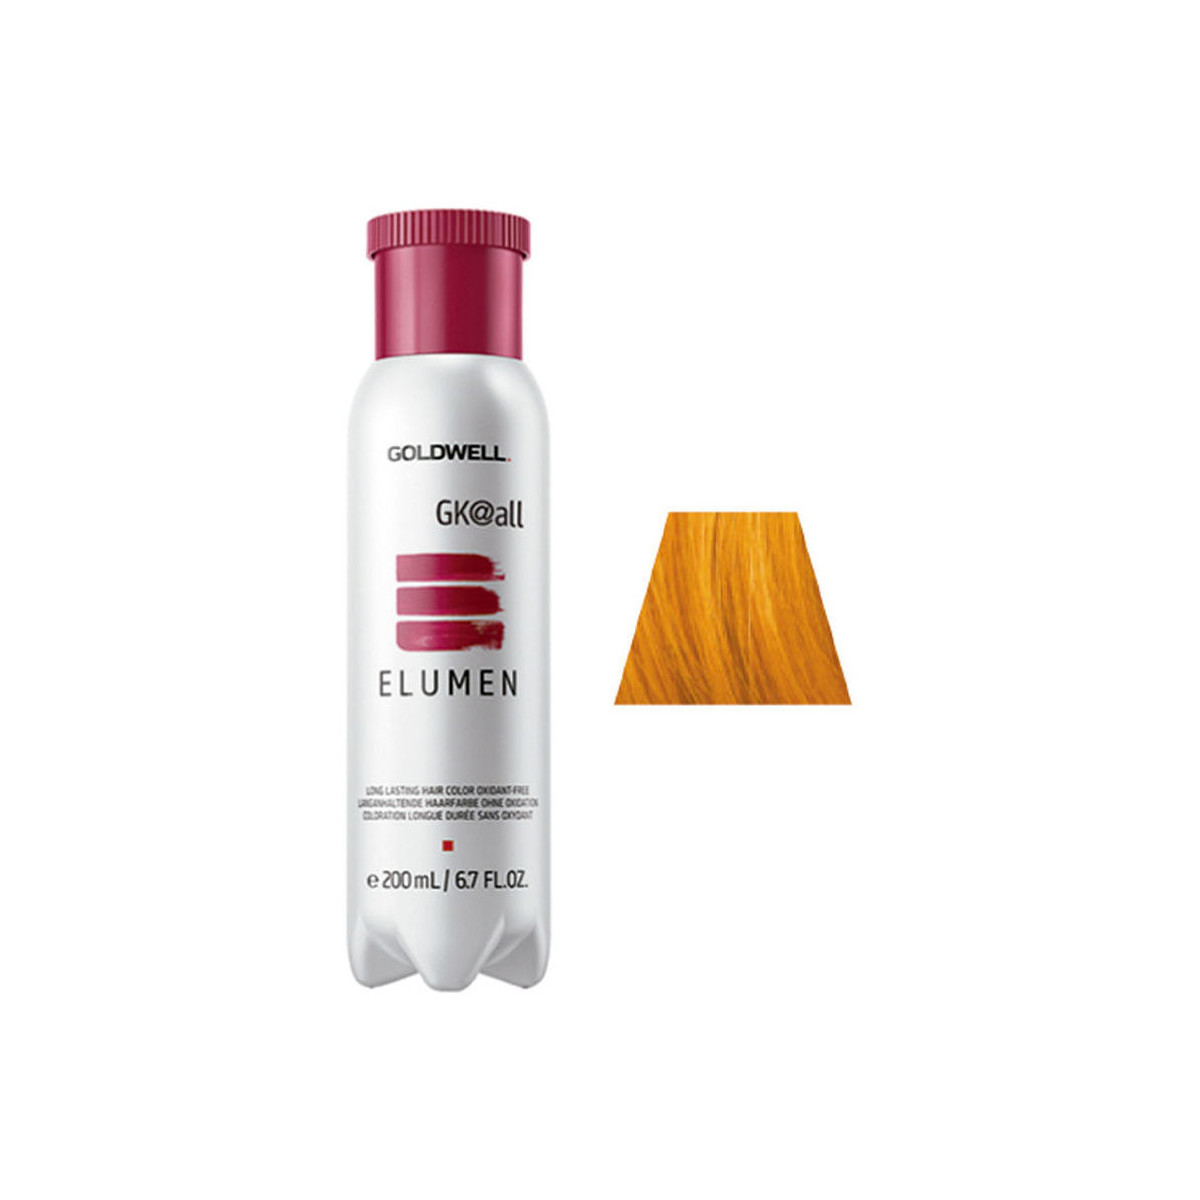 Beauté Colorations Goldwell Elumen Long Lasting Hair Color Oxidant Free gb@all 